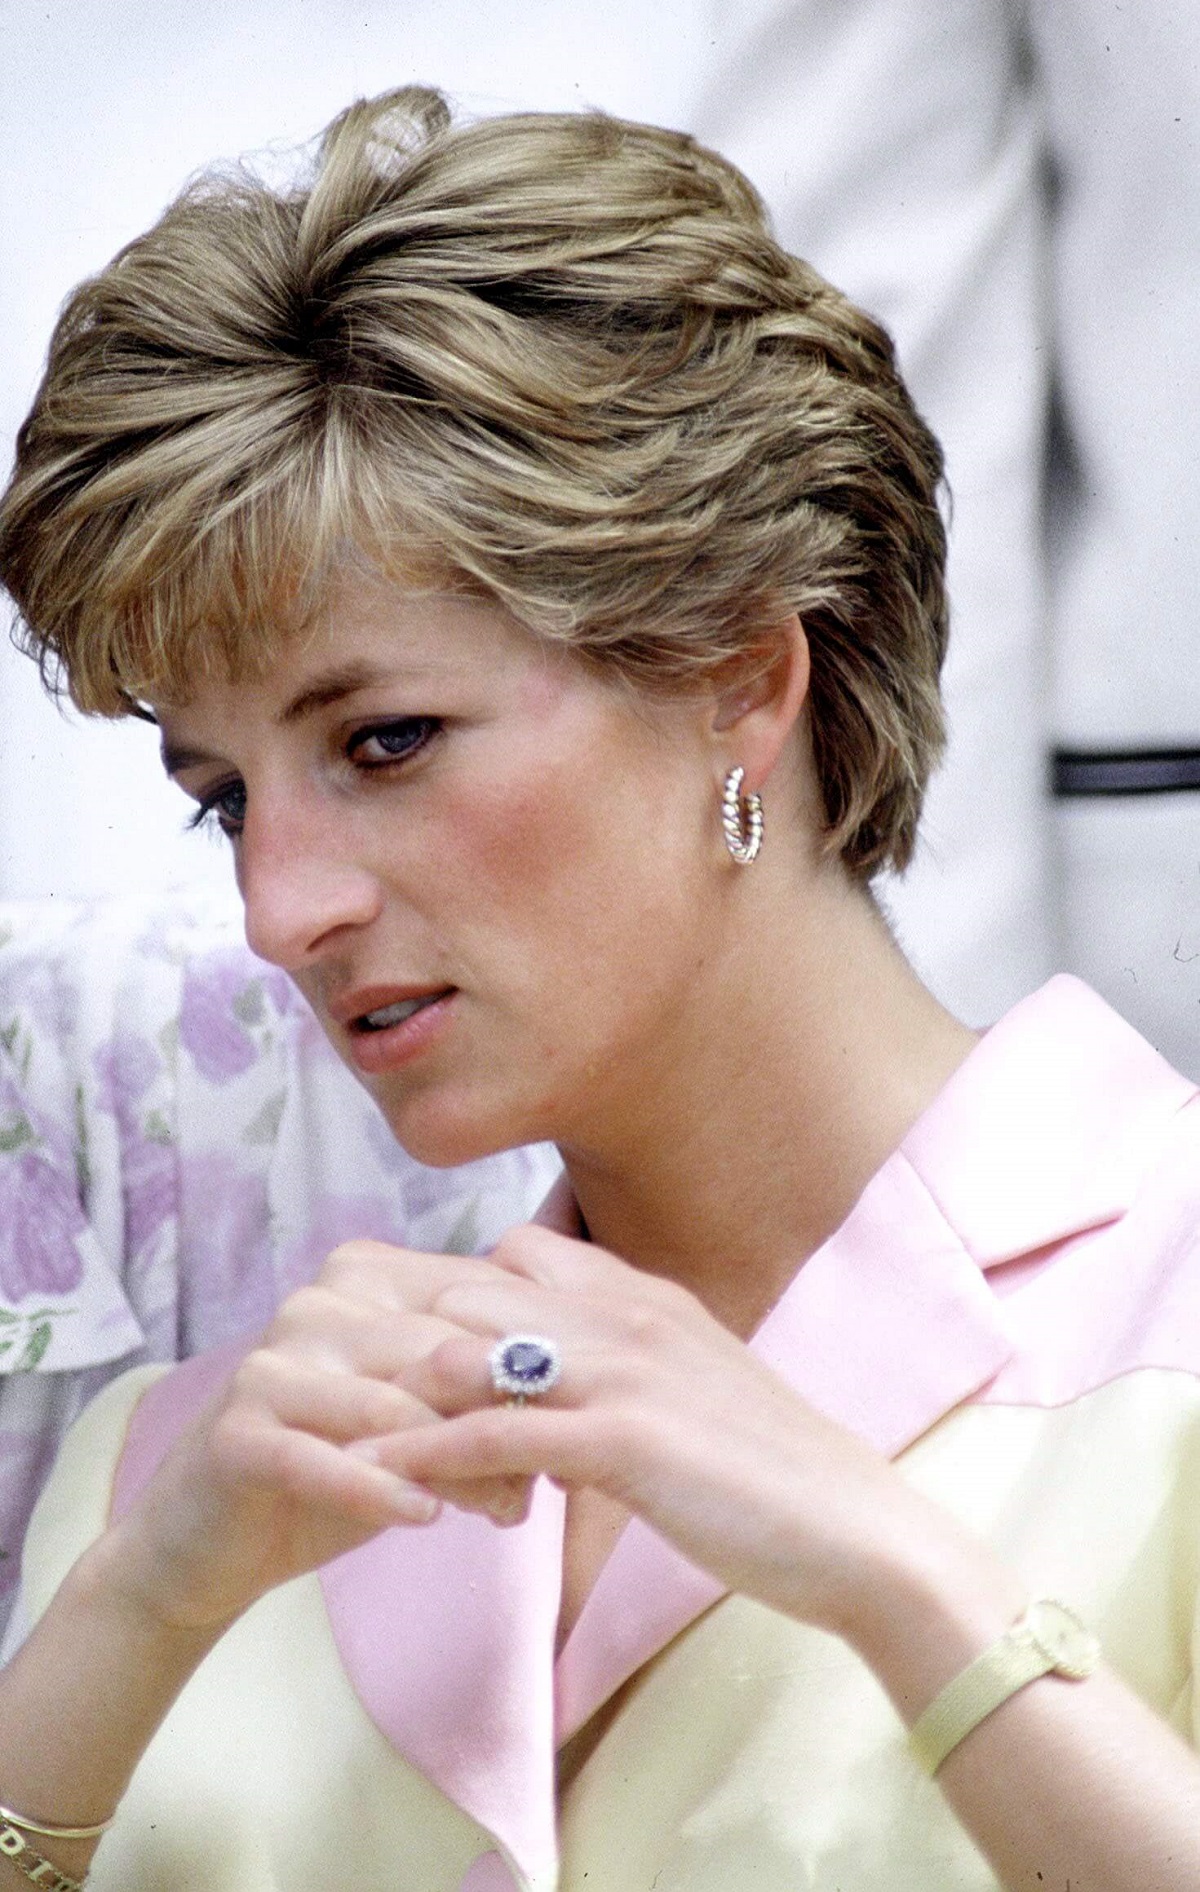 Princess Diana's engagement ring seen as she folds her hands (circa 1991) 